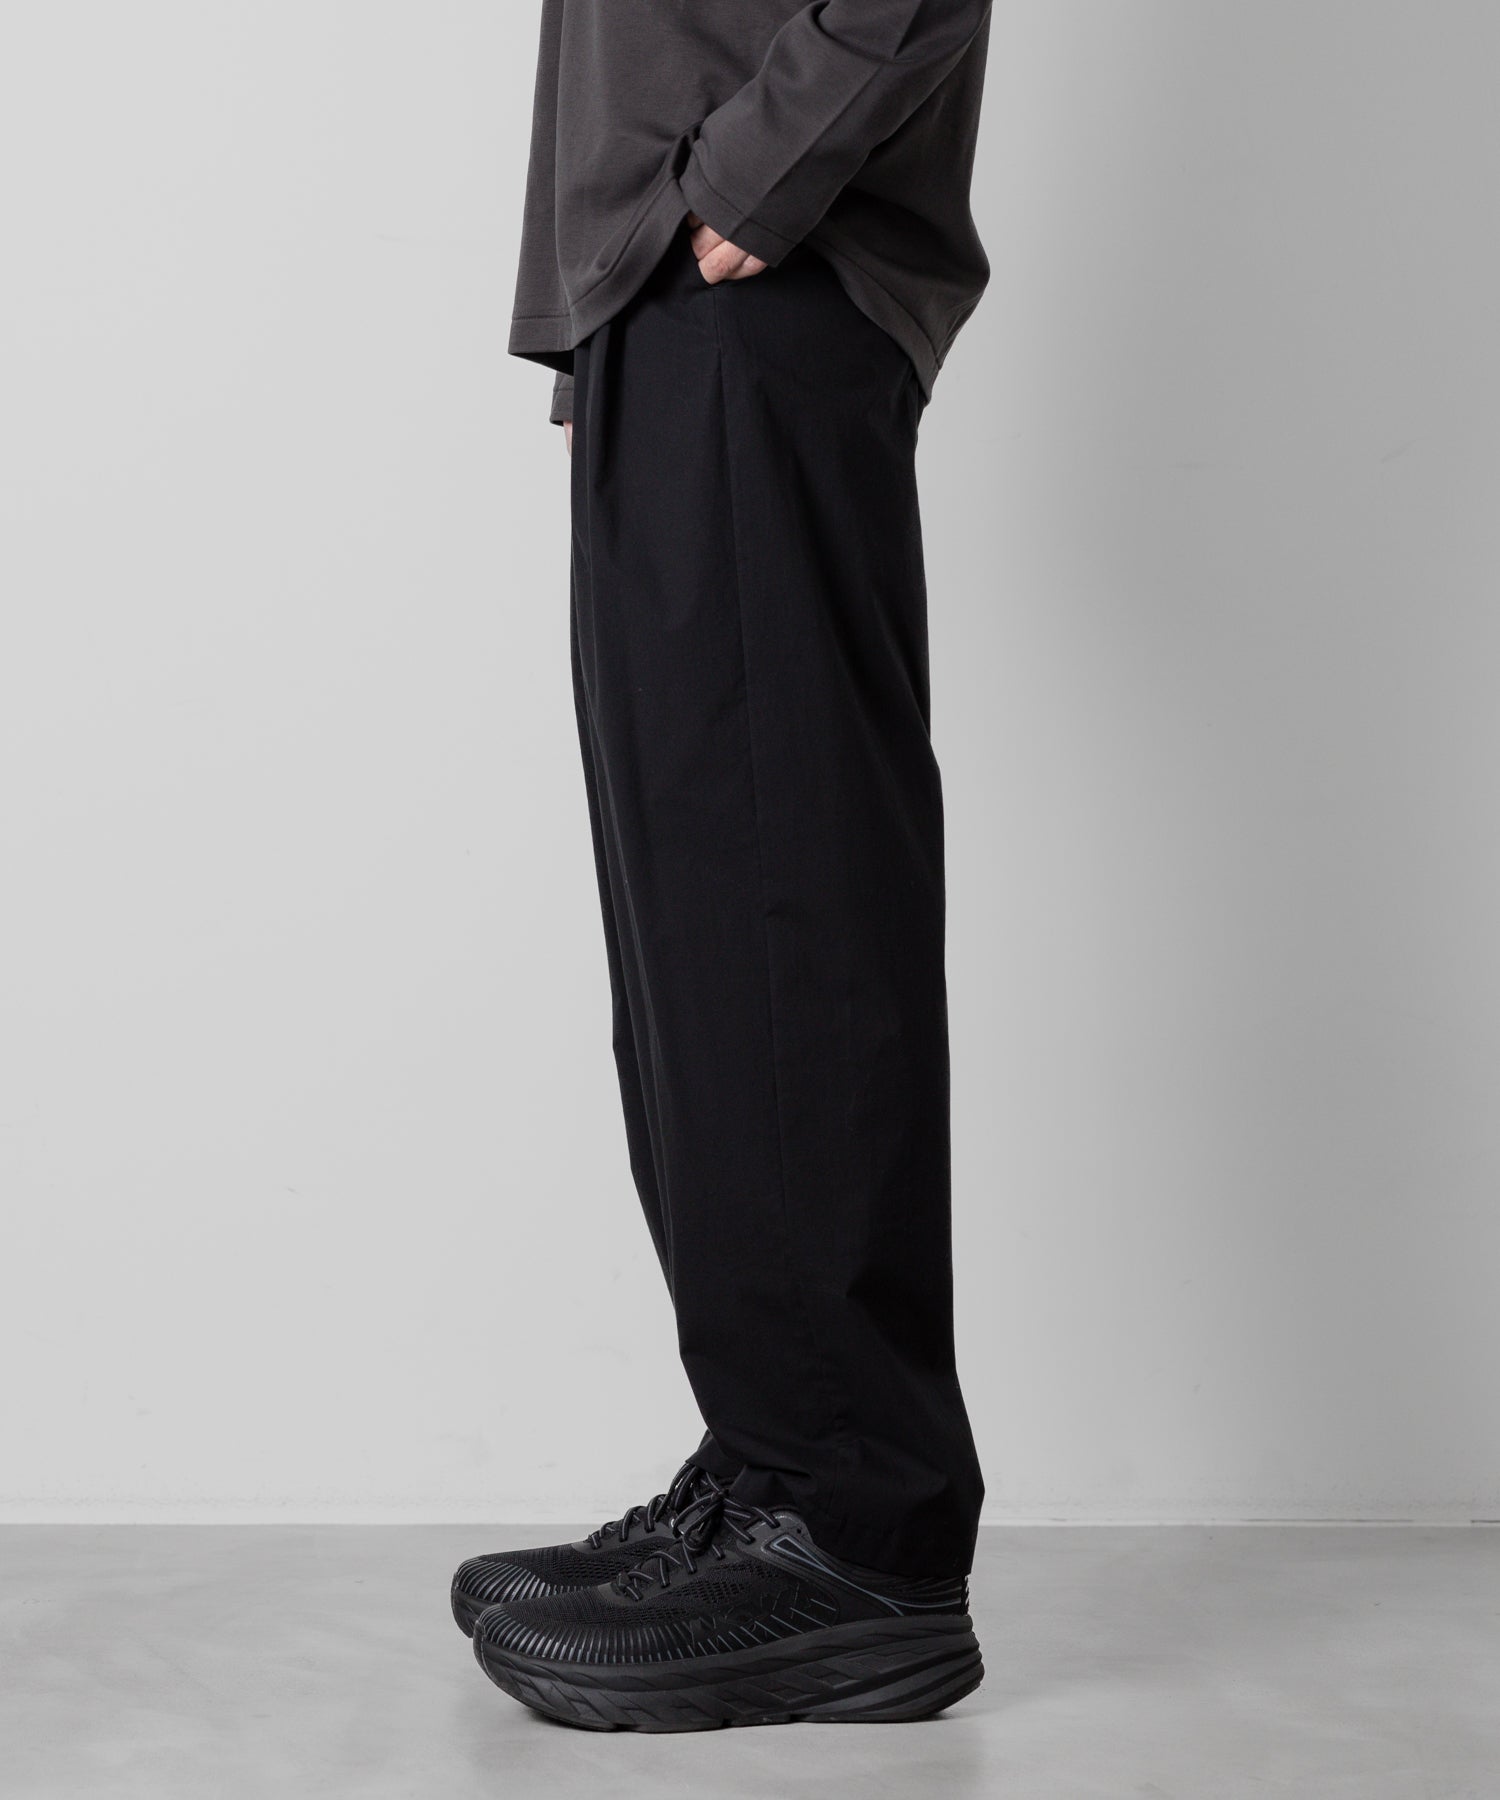 【ATTACHMENT】ATTACHMENT アタッチメントのCO STRETCH TYPEWRITER TAPERED FIT TROUSERS - BLACK 公式通販サイトsession福岡セレクトショップ